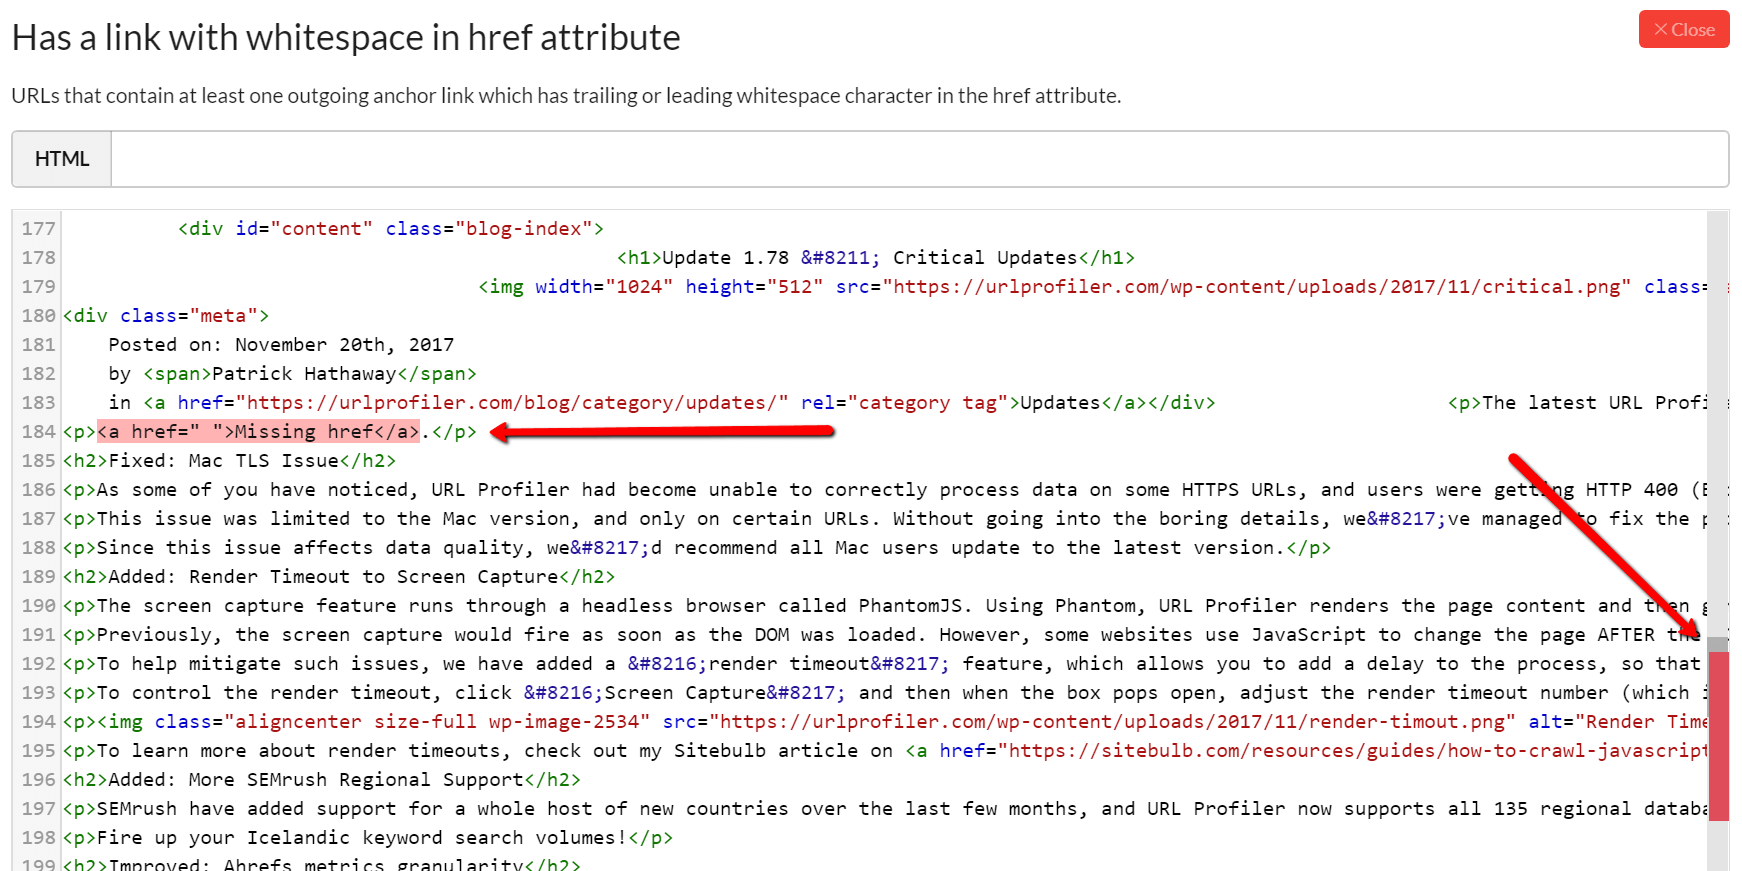 Links with whitepace in the href - highlighted in HTML